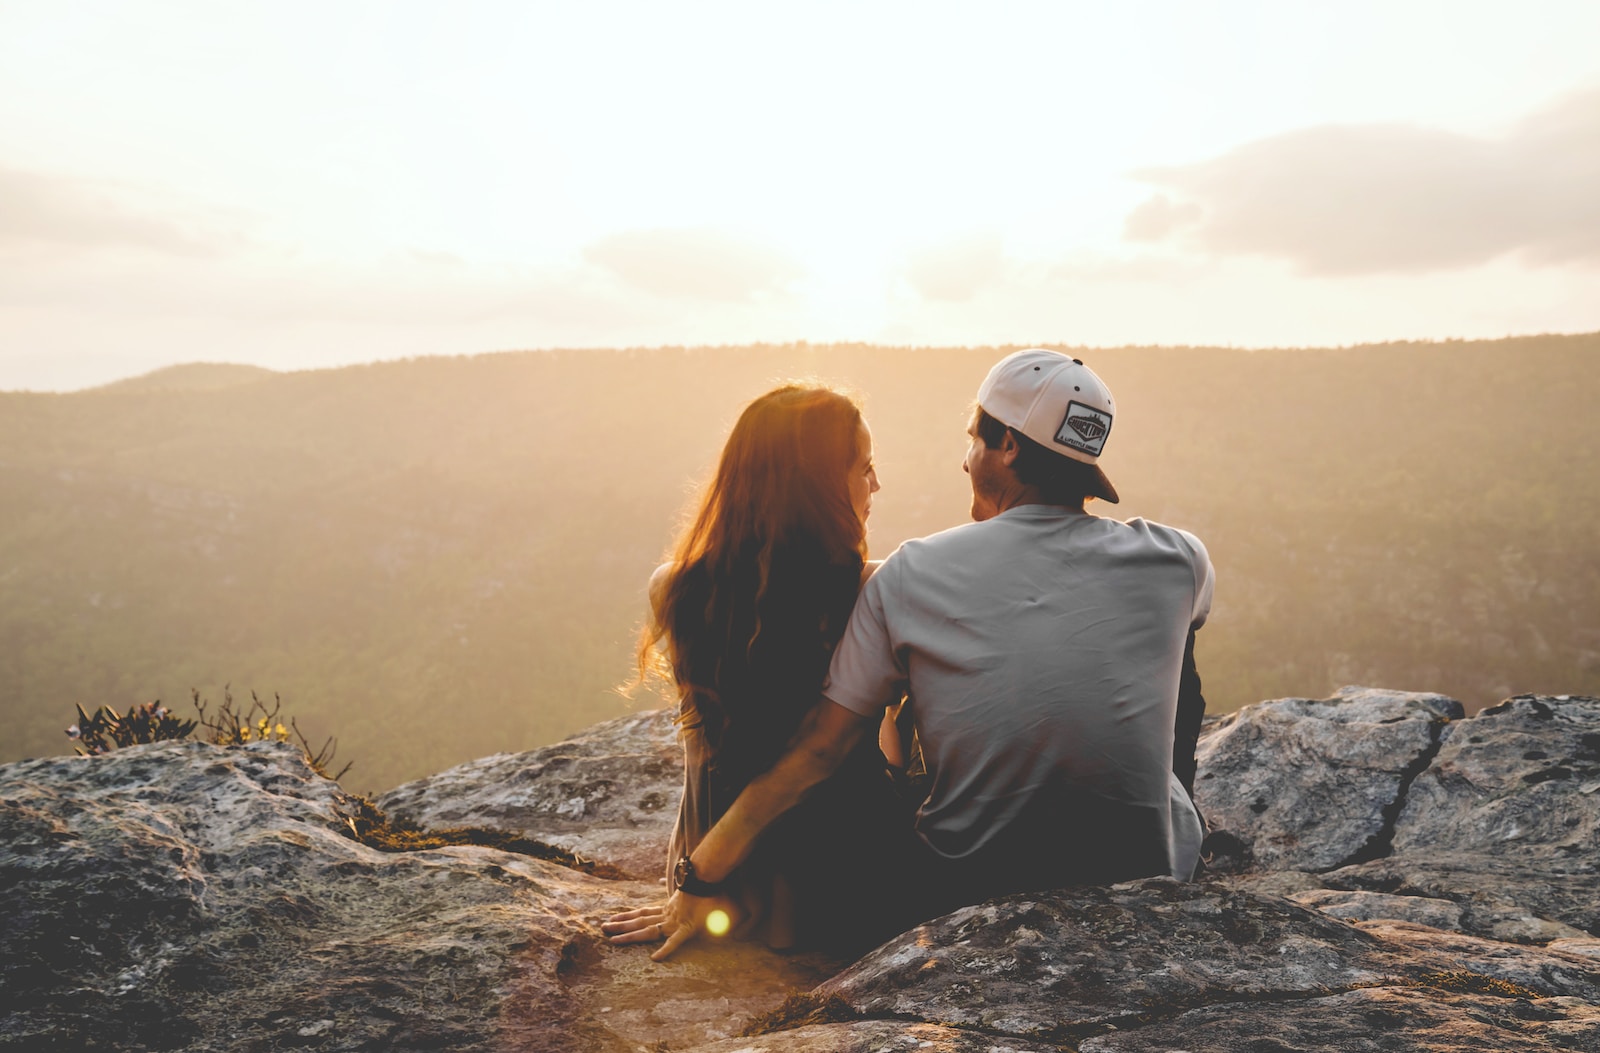 5 Things Strong-Minded People Never Do in Relationships